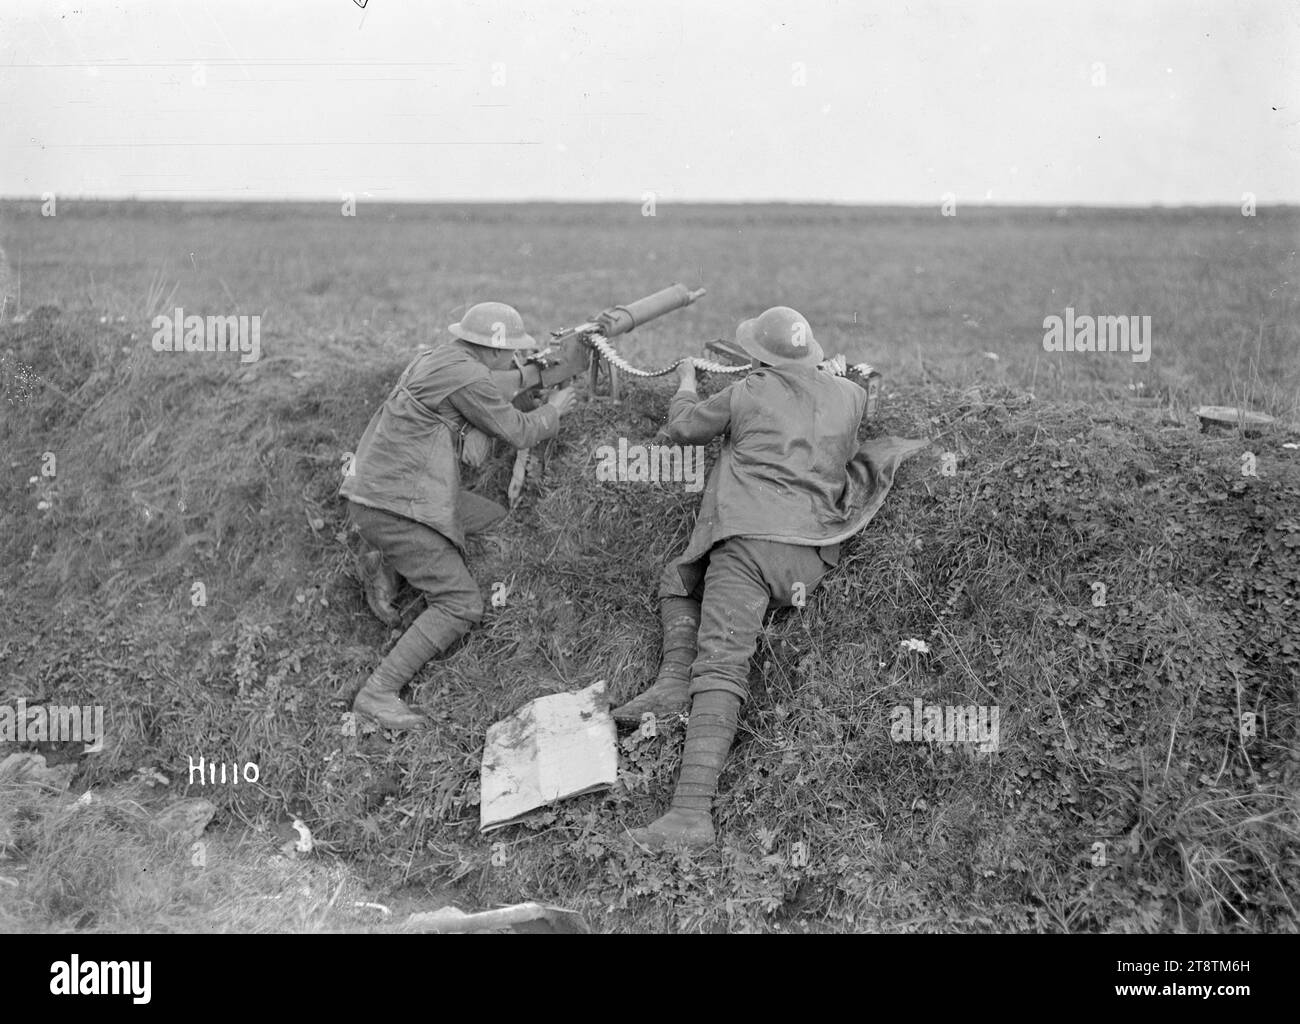 New Zealand troops using a German machine gun, Beaudignies, World War I, Two New Zealand soldiers firing a captured German machine gun at Beaudignies during World War I. One soldier is sighting and firing the gun while another is holding the ammunition belt. Both are resting against a trench wall with the machine gun on the top of it. Photograph taken 3 November 1918 Stock Photo